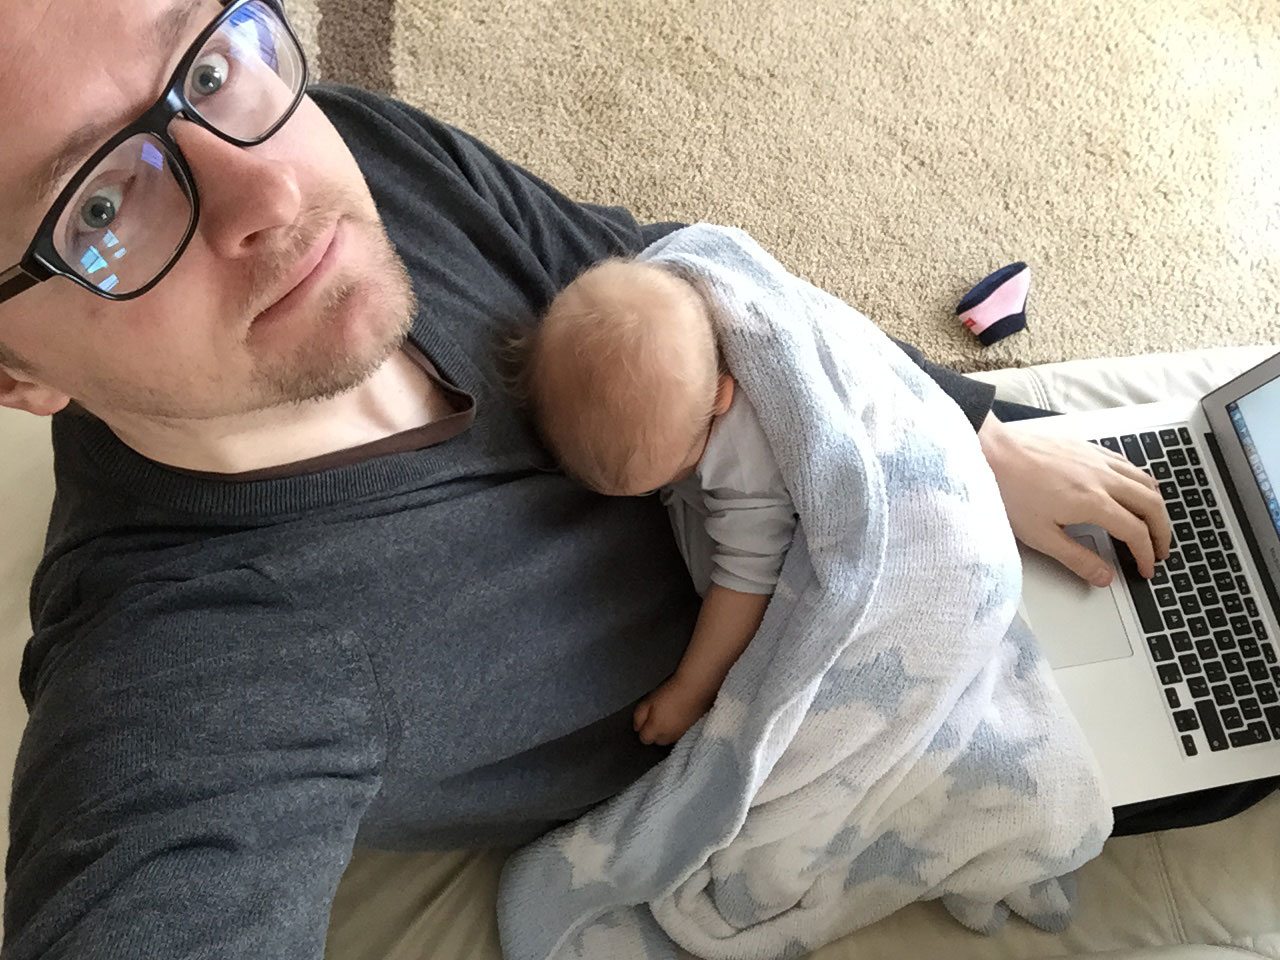 Programming with a baby